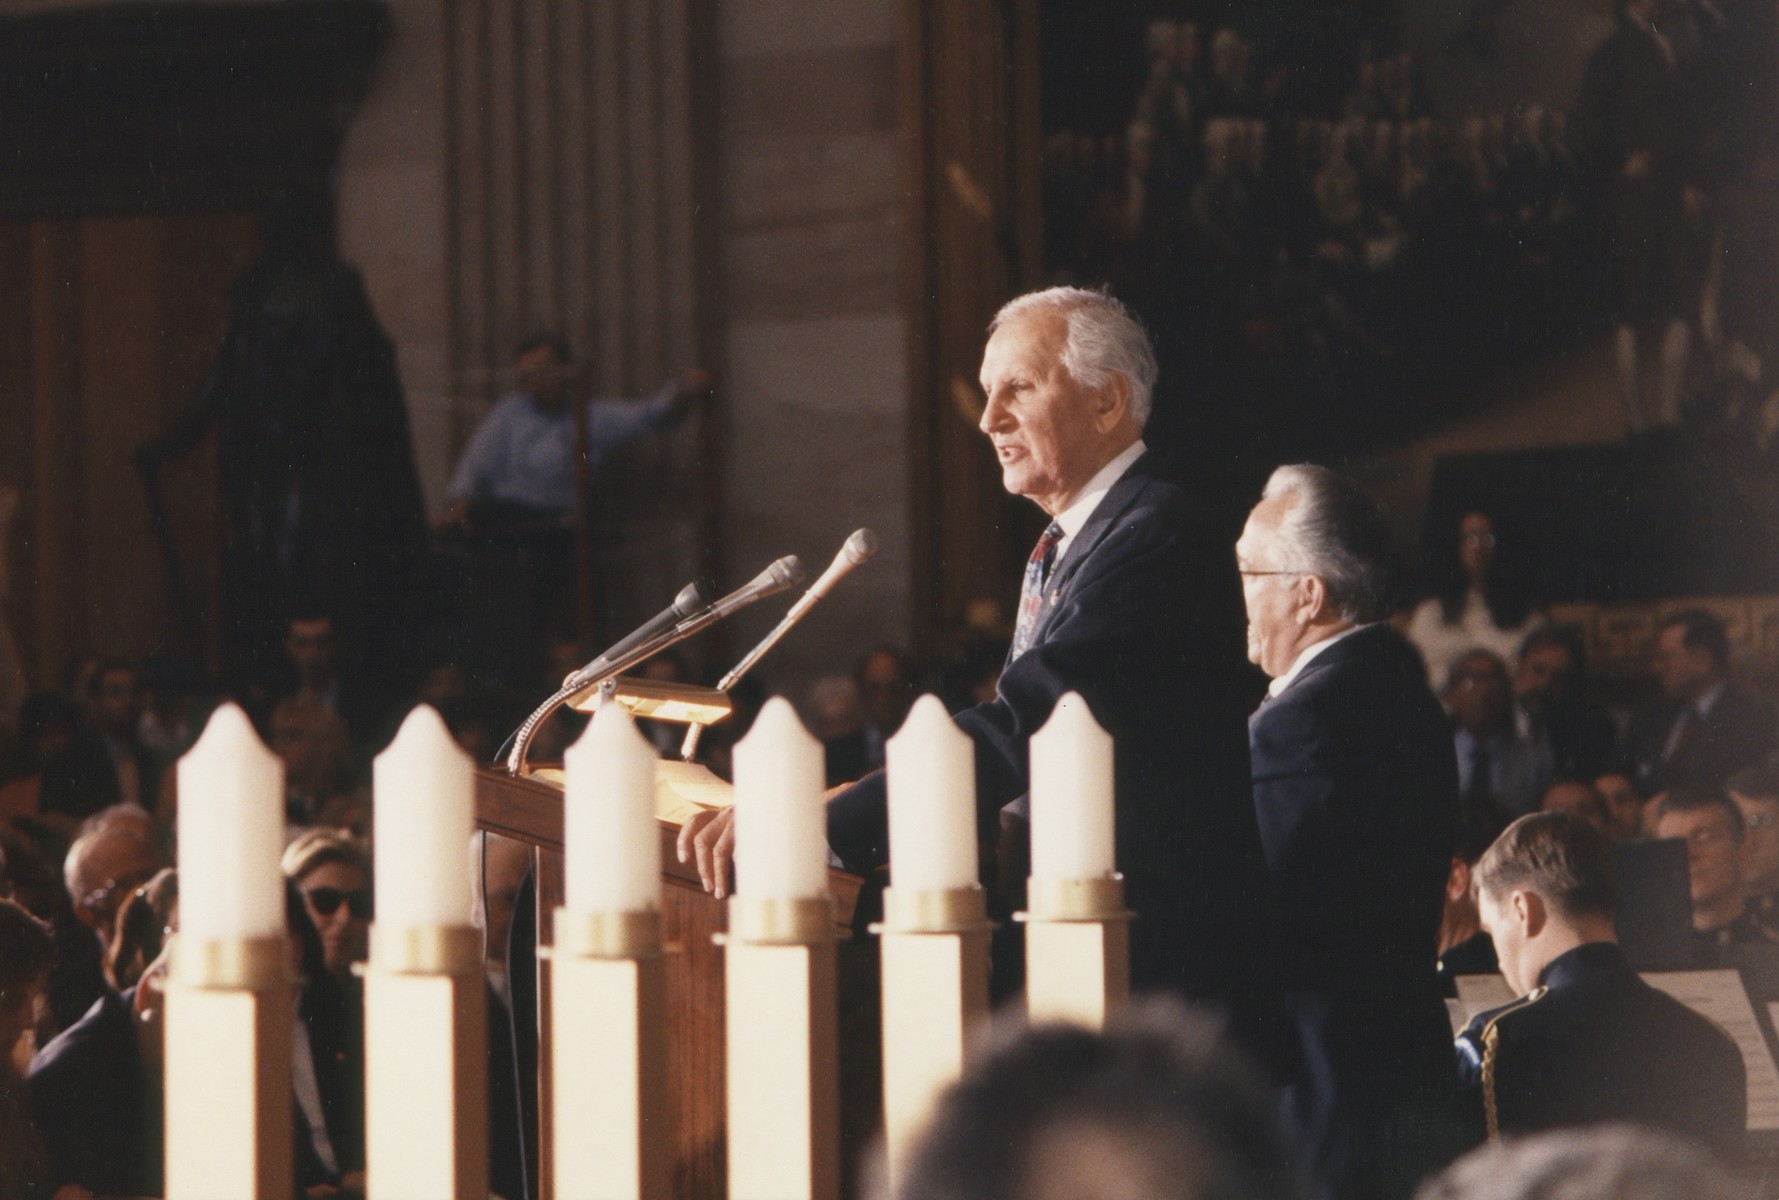 Rep. Sidney Yates speaks at the 1993 Days of Remembrance ceremony in the Capitol rotunda.